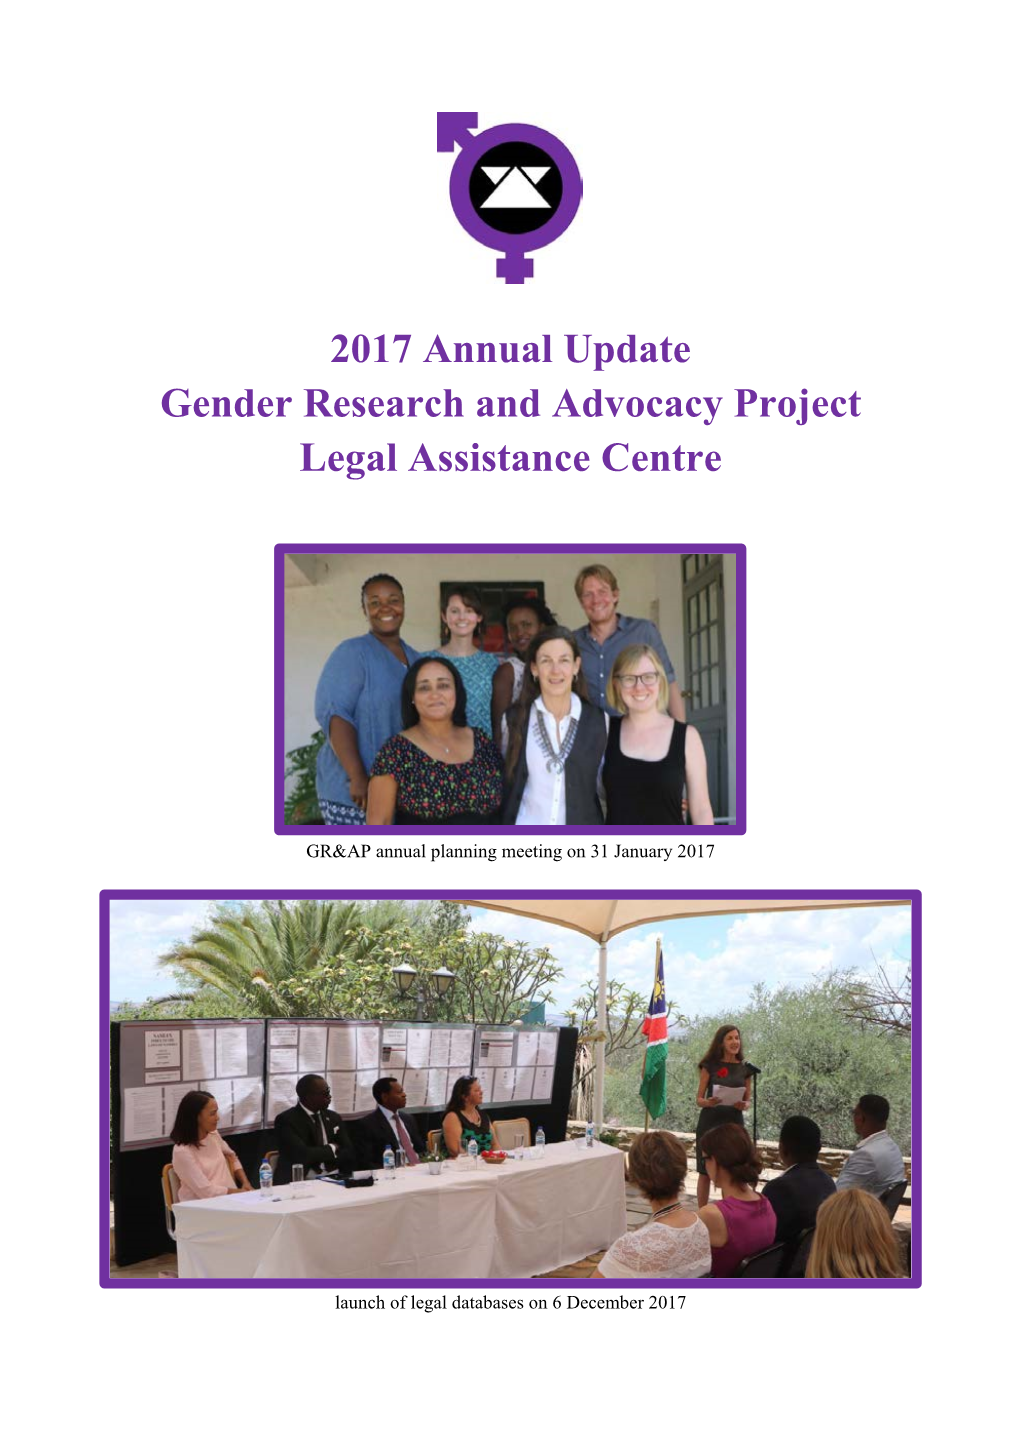 2017 Annual Update Gender Research and Advocacy Project Legal Assistance Centre